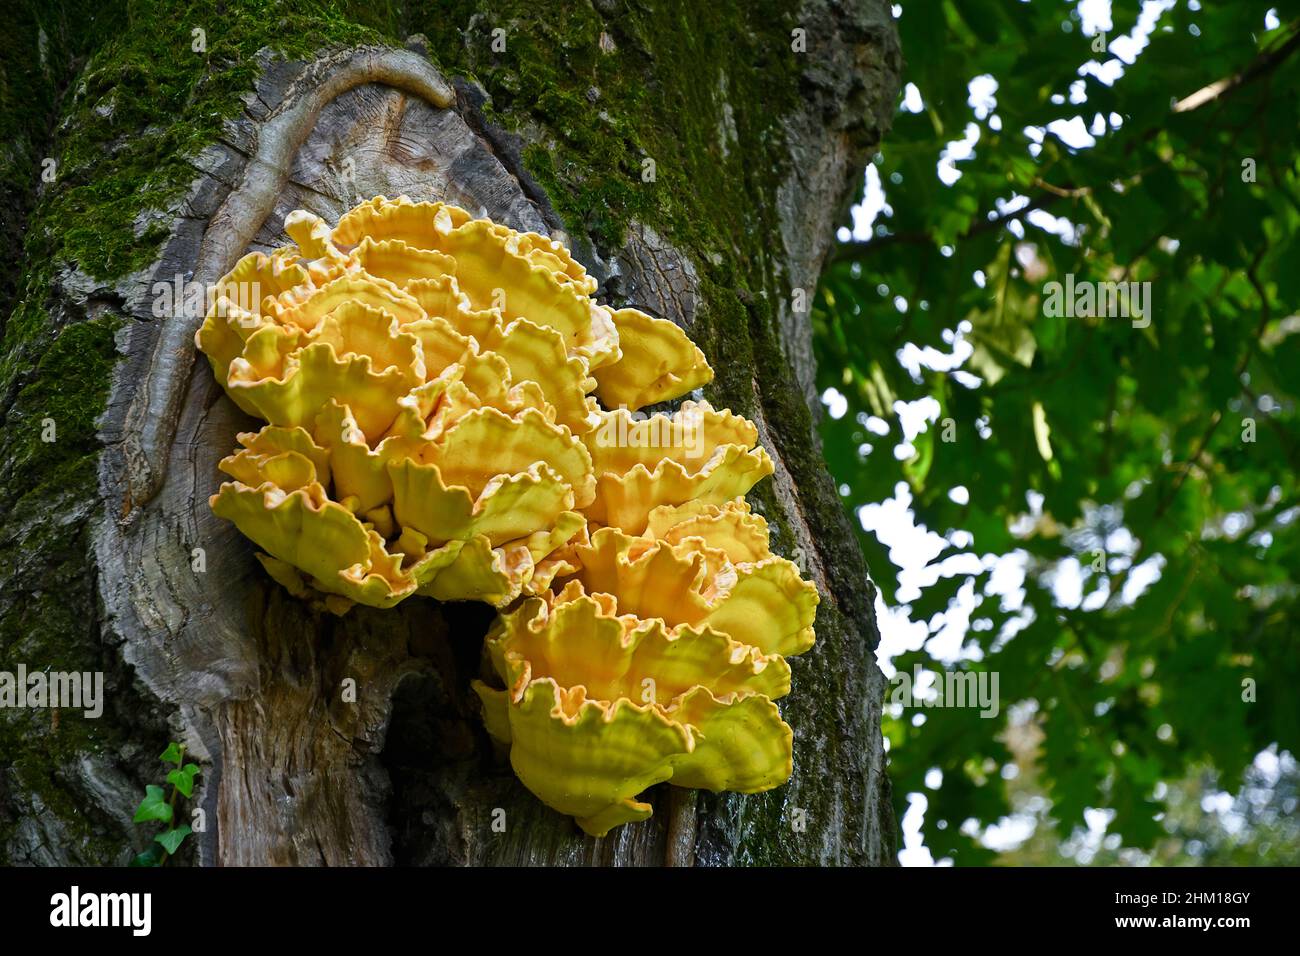 A large yellow fungus on an oak trunk Stock Photo